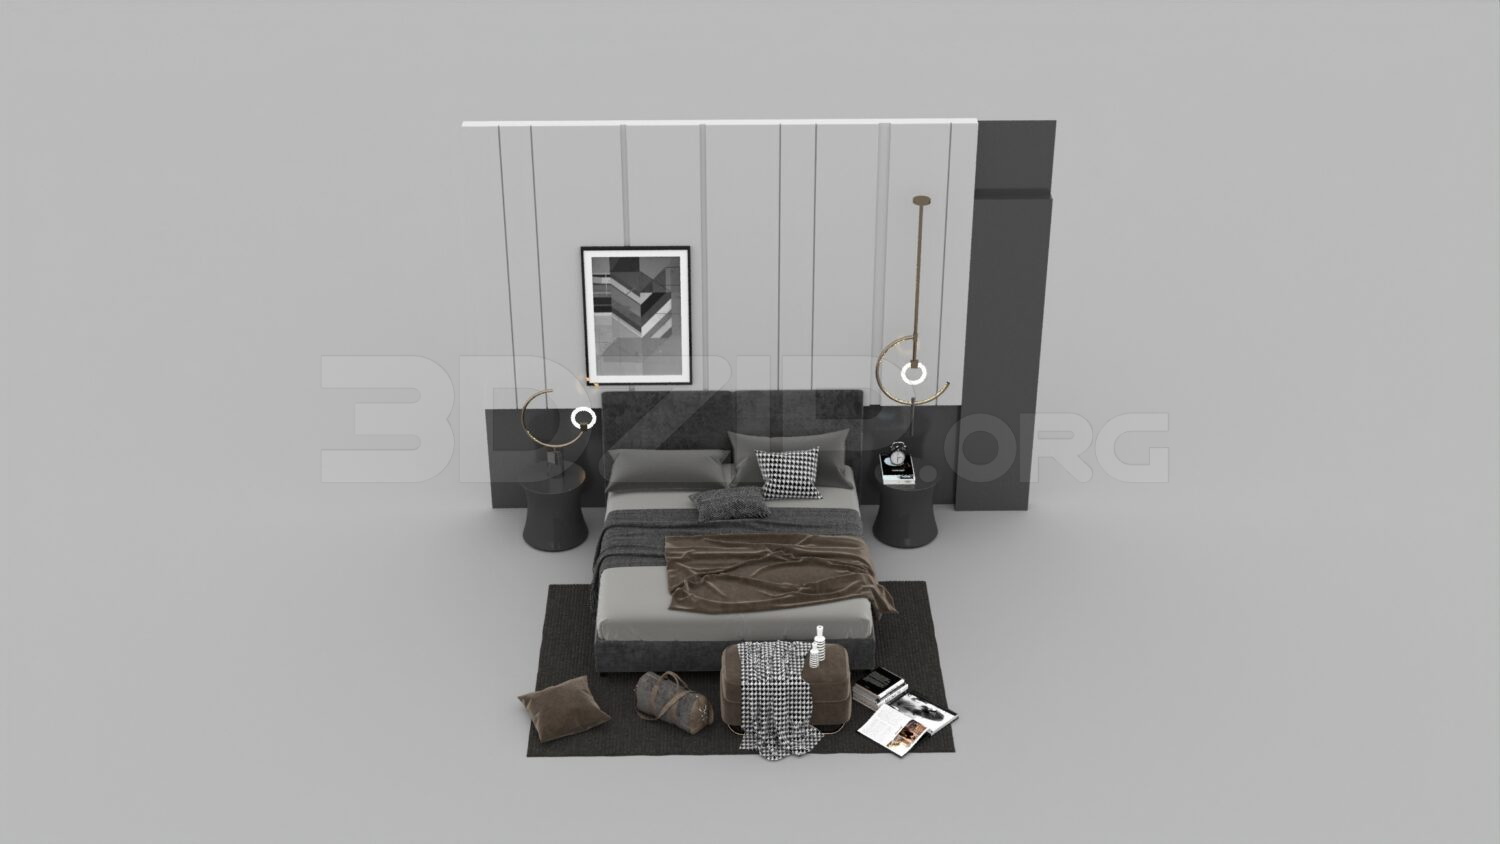 1727. Download Free Bed Model By Long